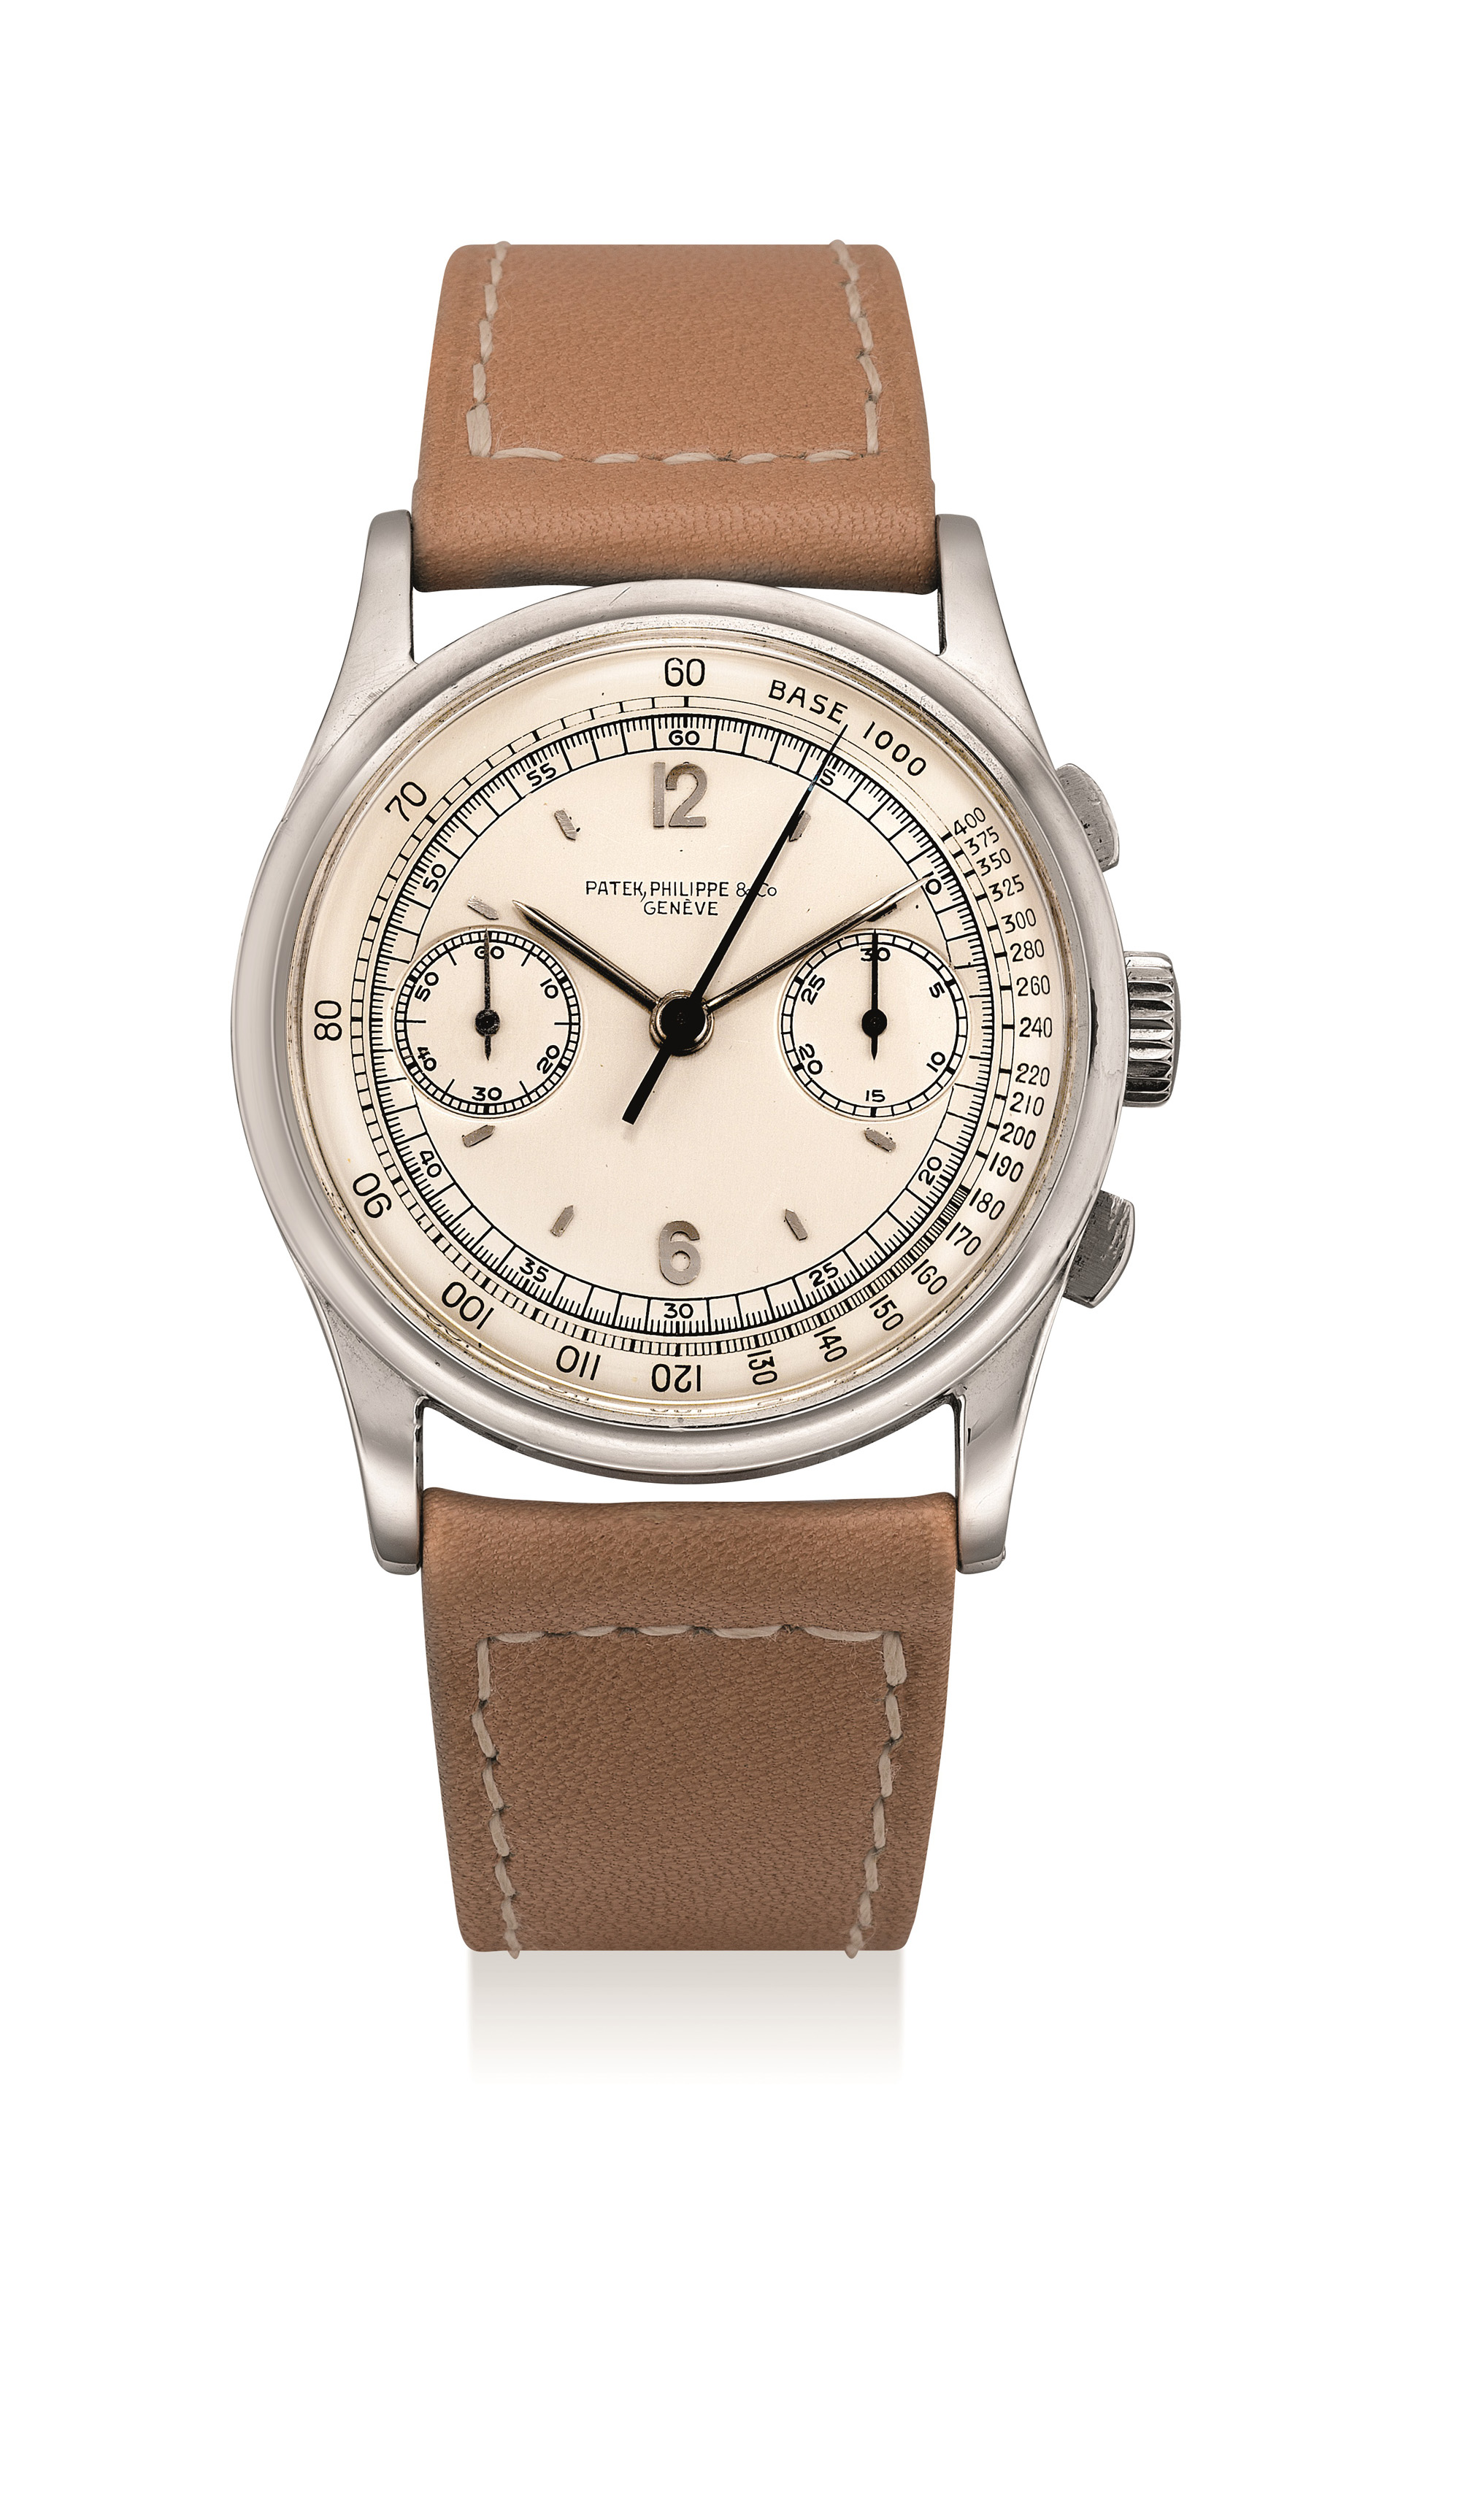 Stainless steel chronograph with the original certificate. Sold for $626,104